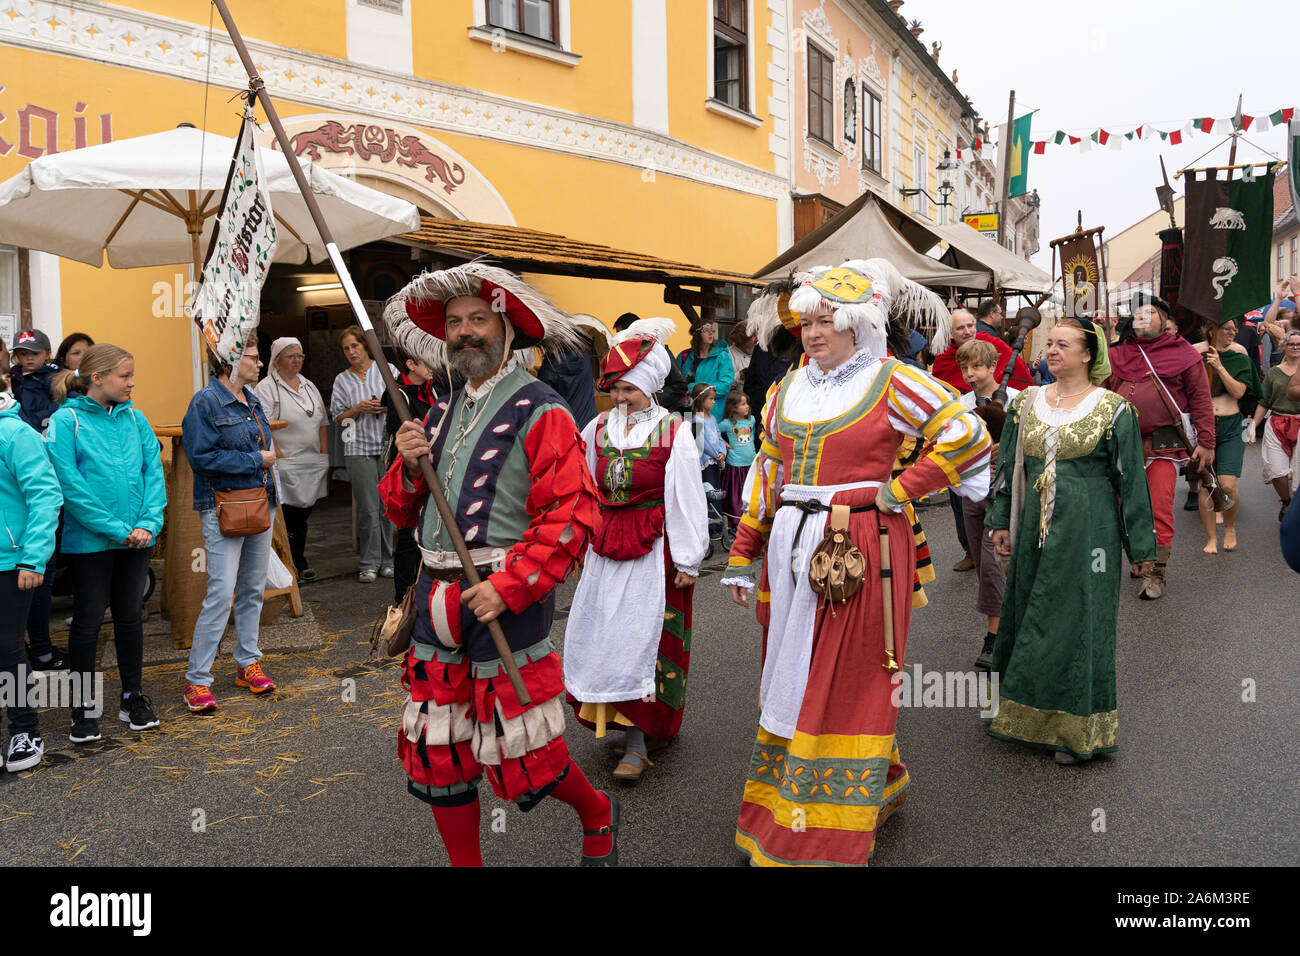 Historic actors wearing colourful medieval clothes and carrying banners in a parade, Eggenburg Medieval Festival, Austria's largest medieval event Stock Photo